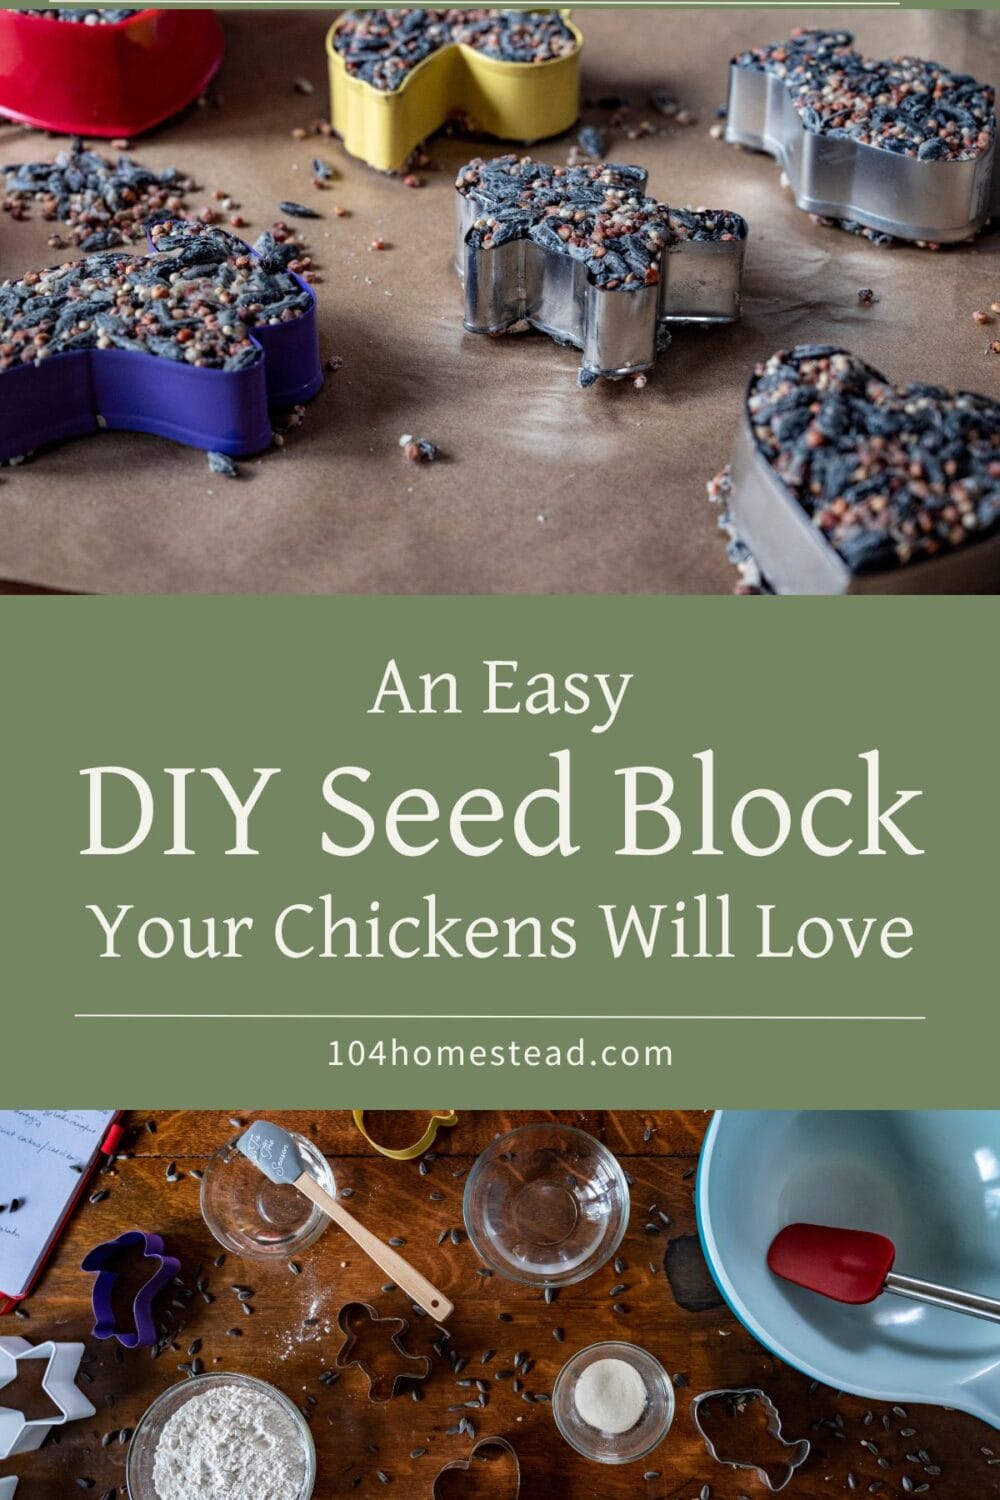 A Pinterest-friendly graphic for my post on how to make seed block treats for your chickens.